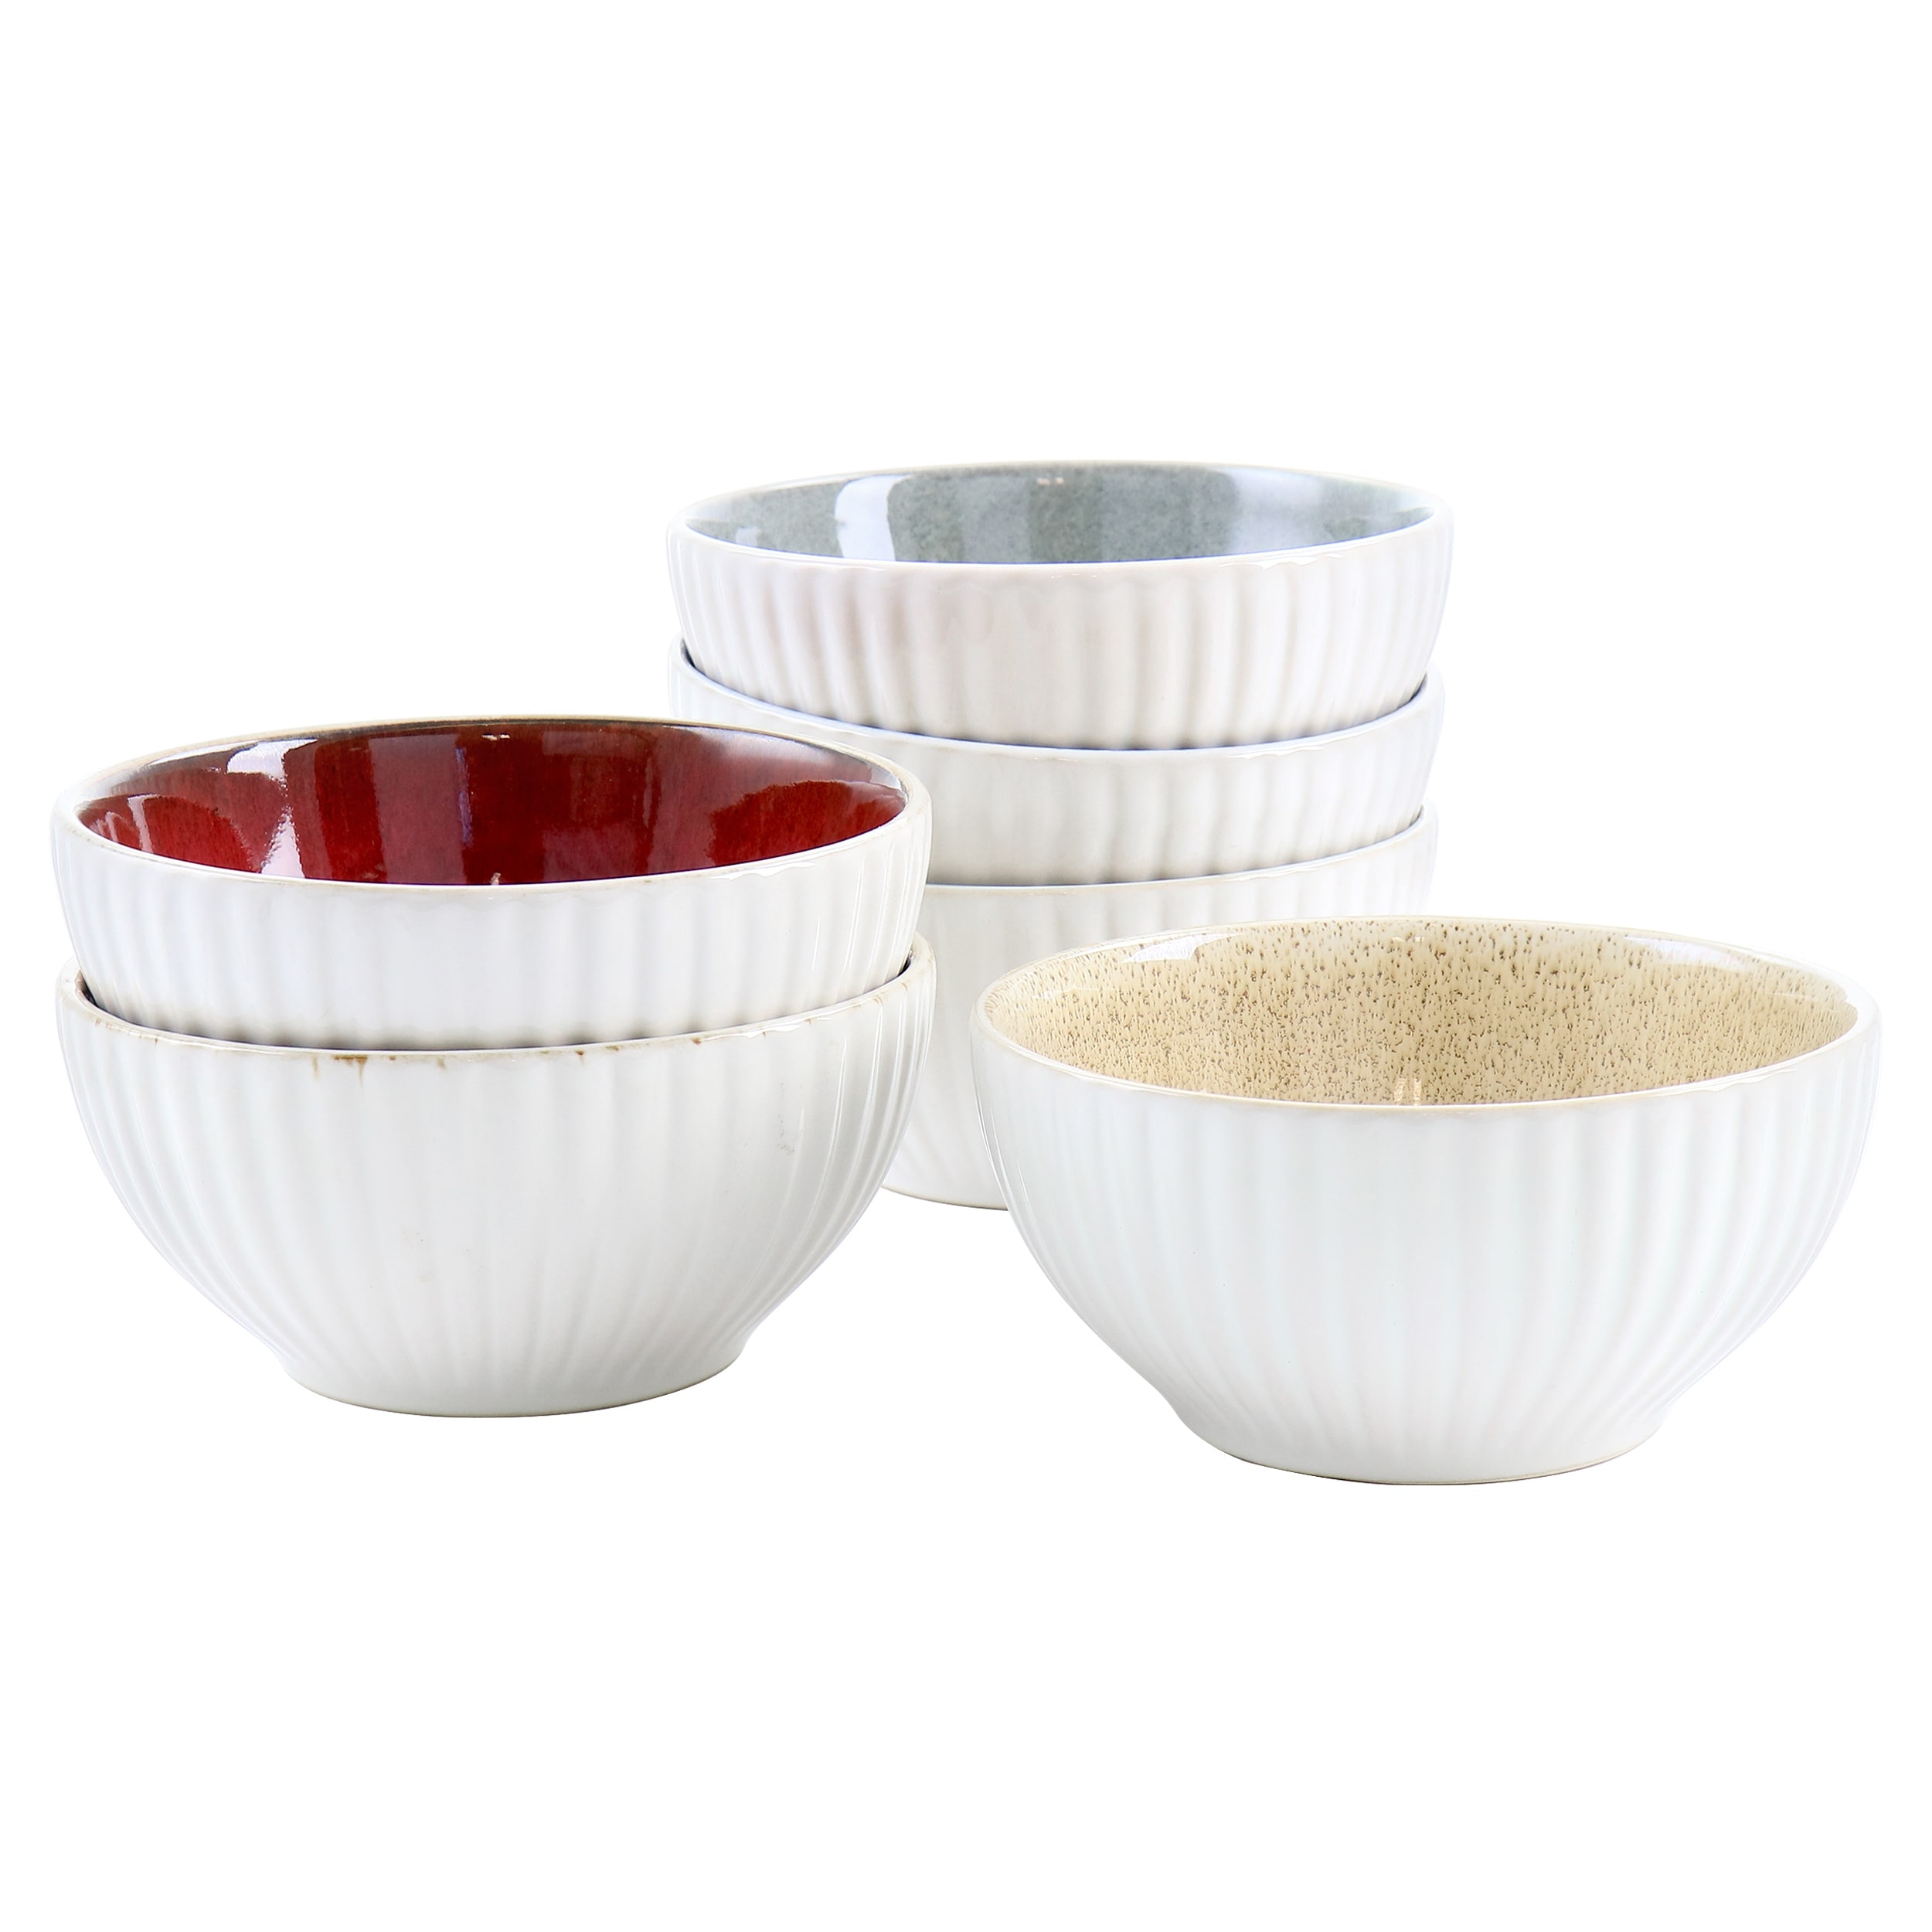 Martha Stewart Collection Striped Mixing Bowls, Set of 3, Created